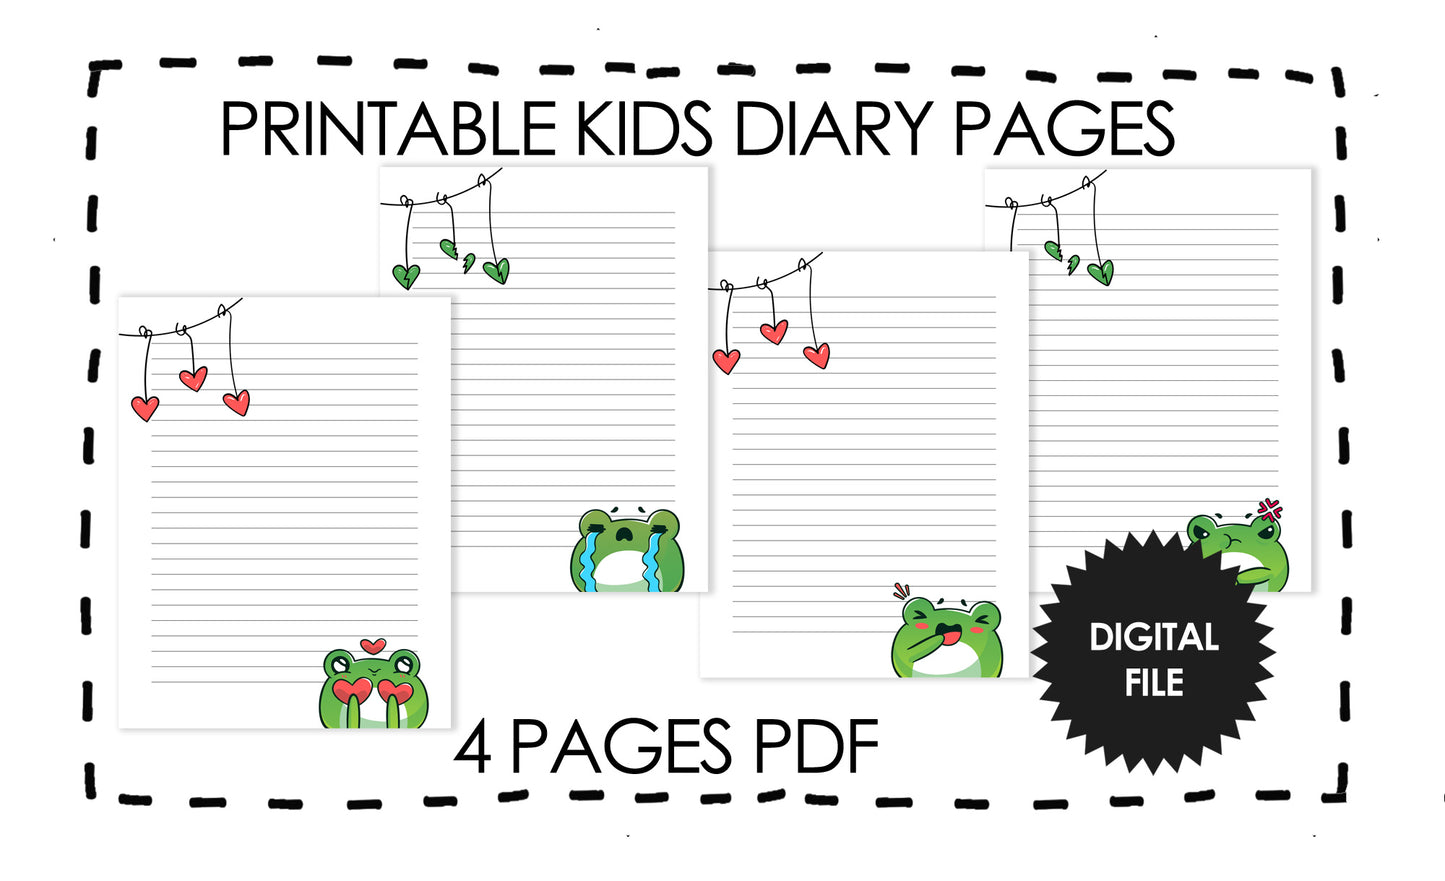 Printable Kids Dairy Pages, Happy Day, Funny Day, Sad Day, Bad Day Dairy Page Template preview